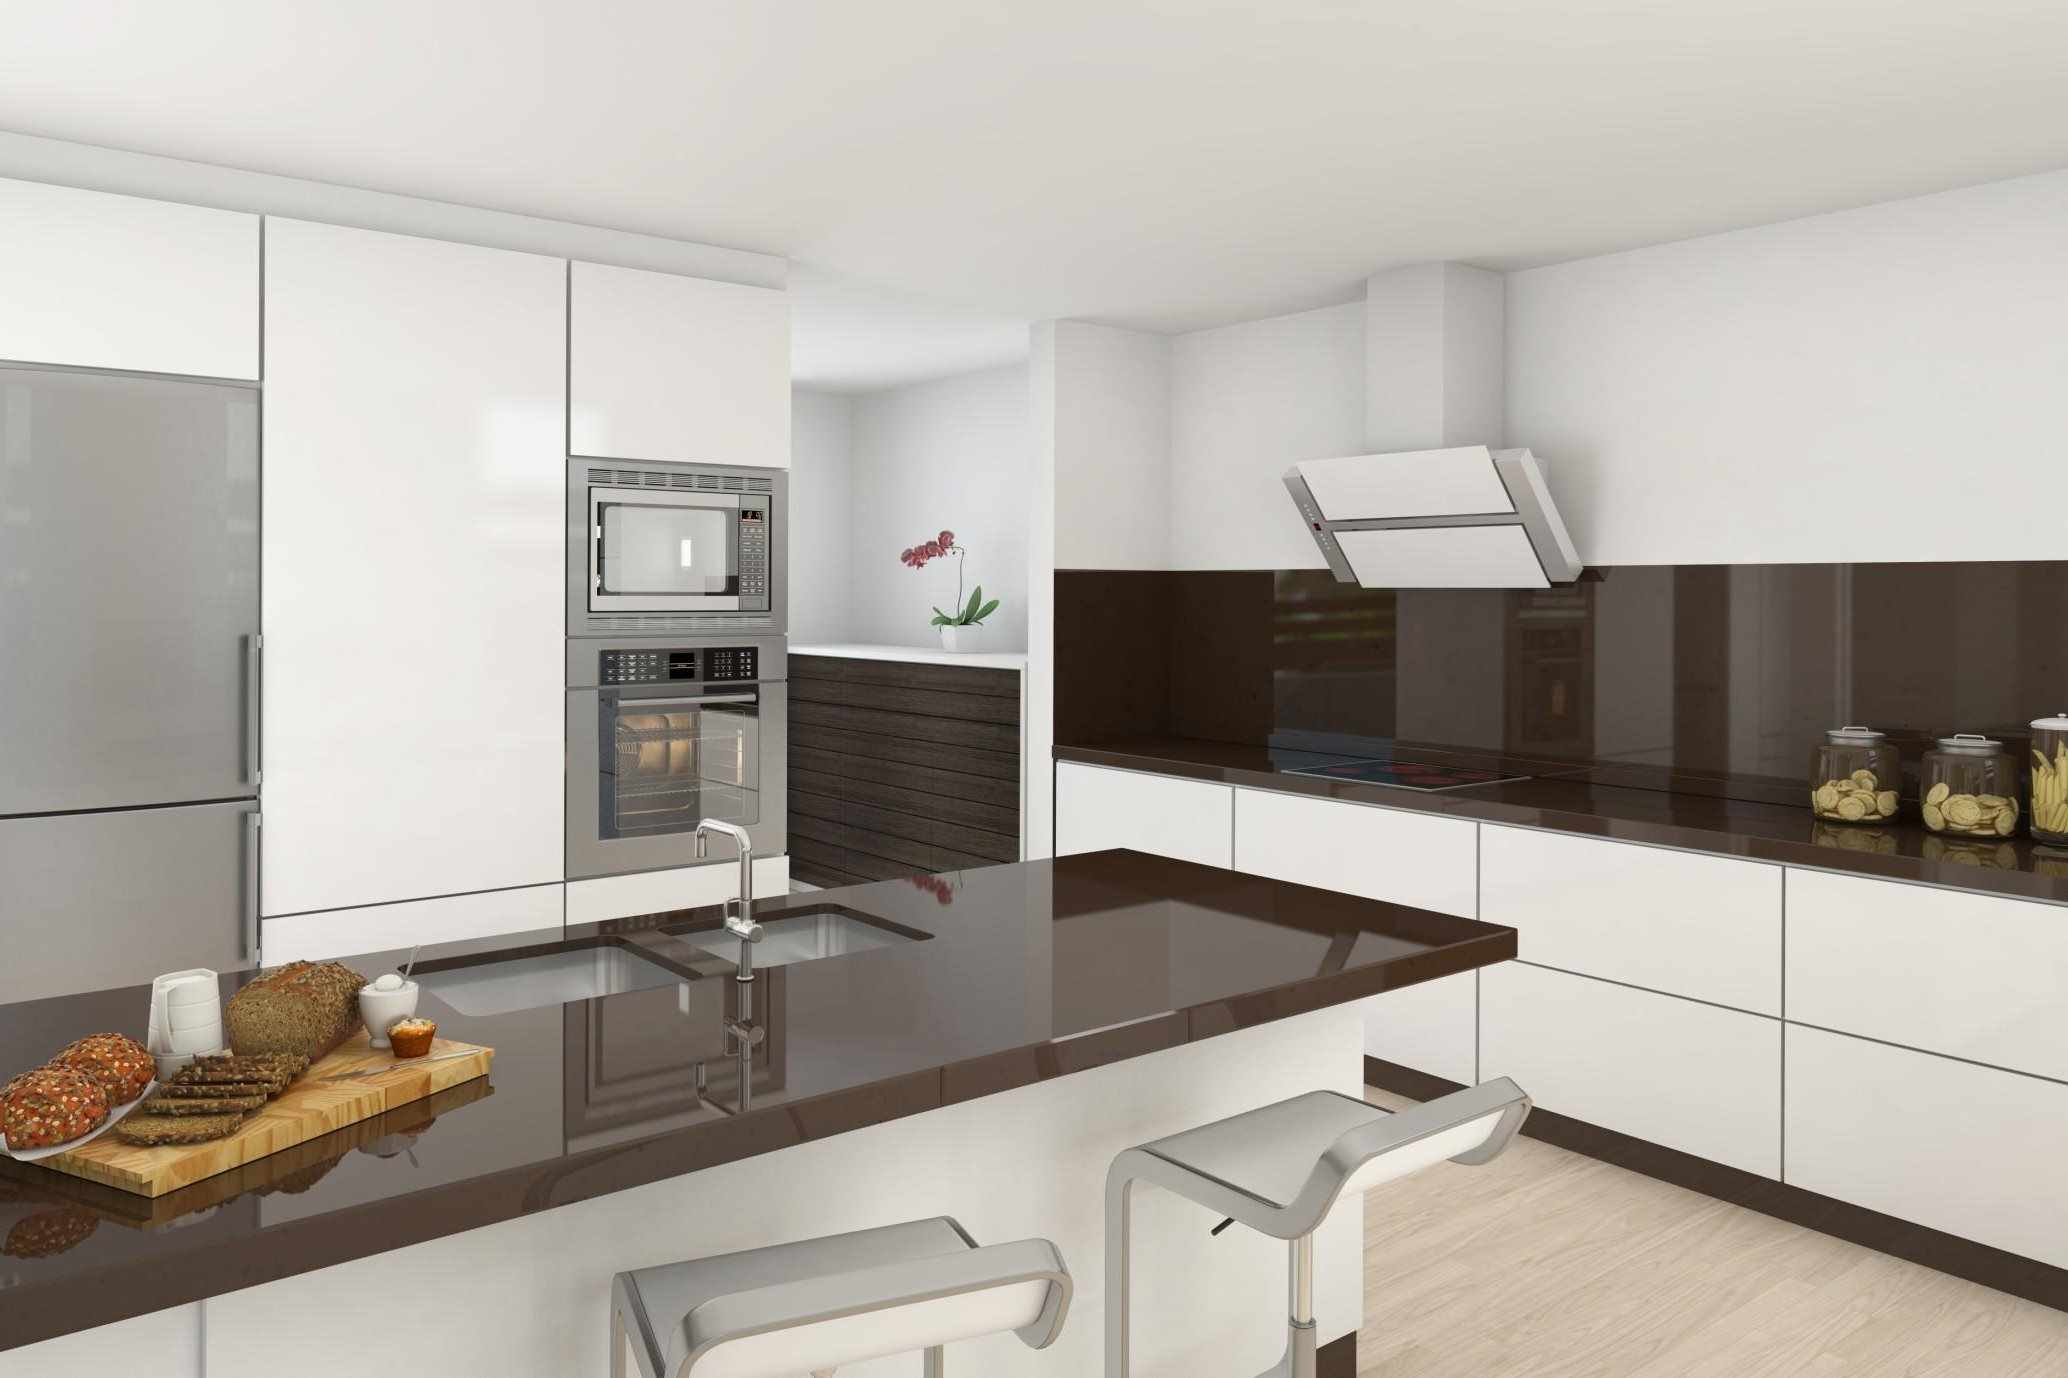 an example of a bright kitchen style